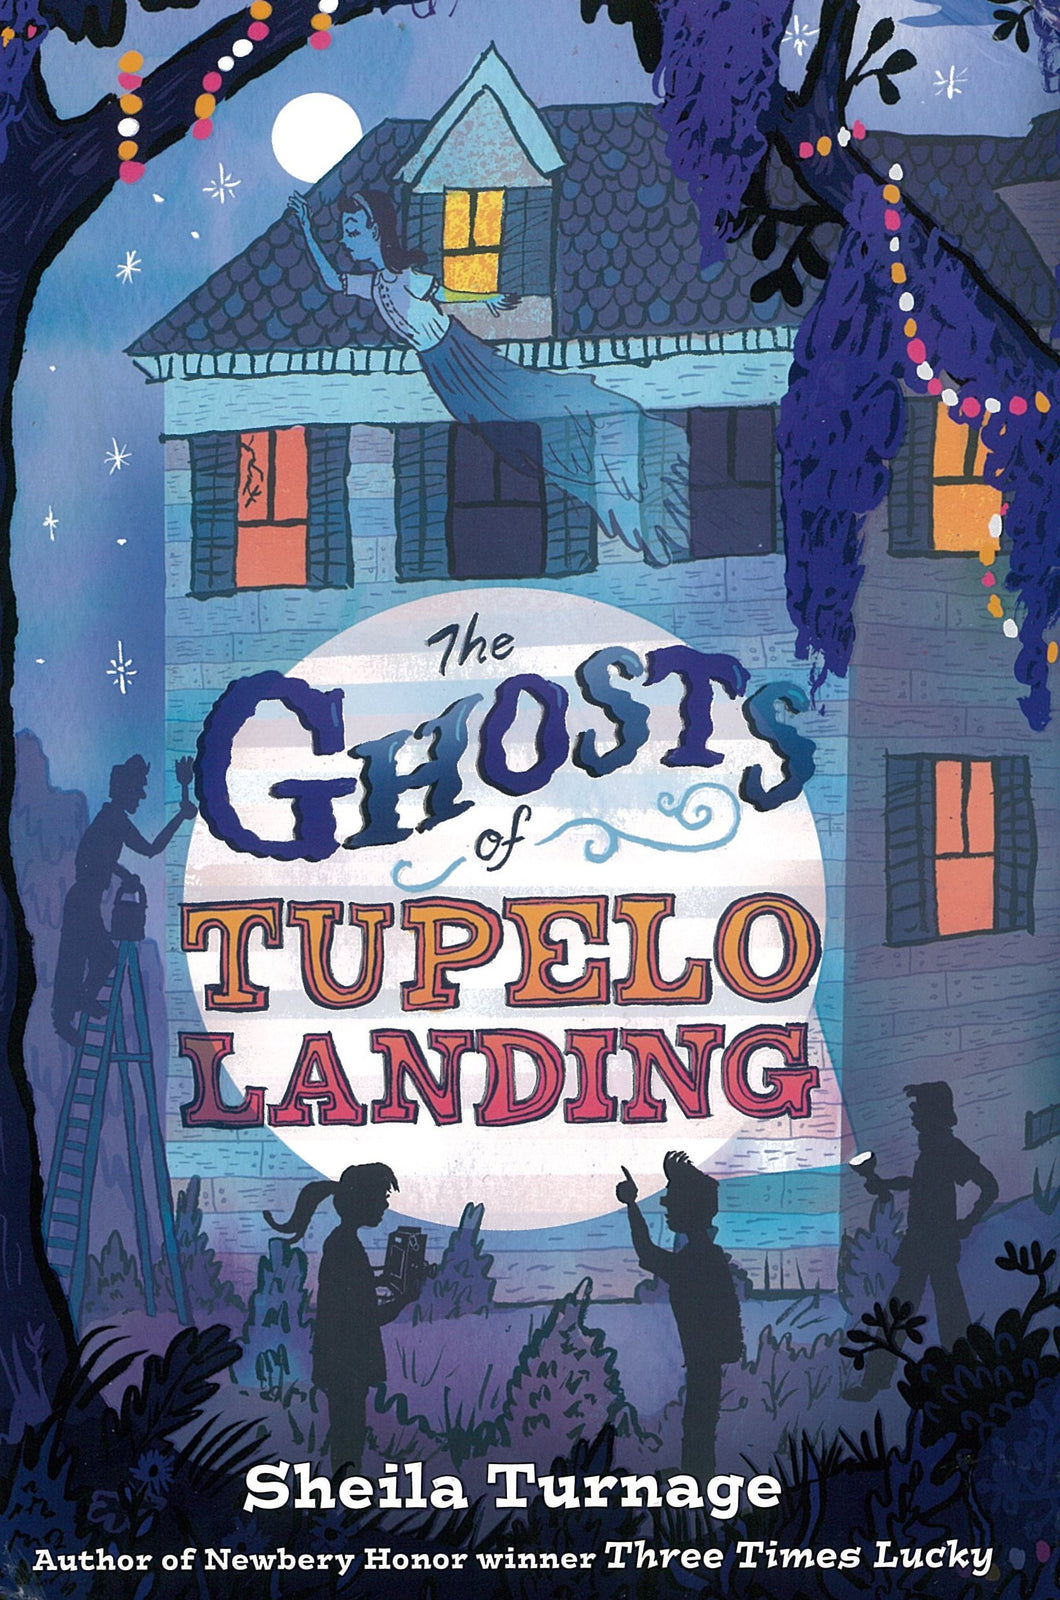 The Ghosts Of Tupelo Landing [Sheila Turnage] A Mo & Dale Mystery: Book Two